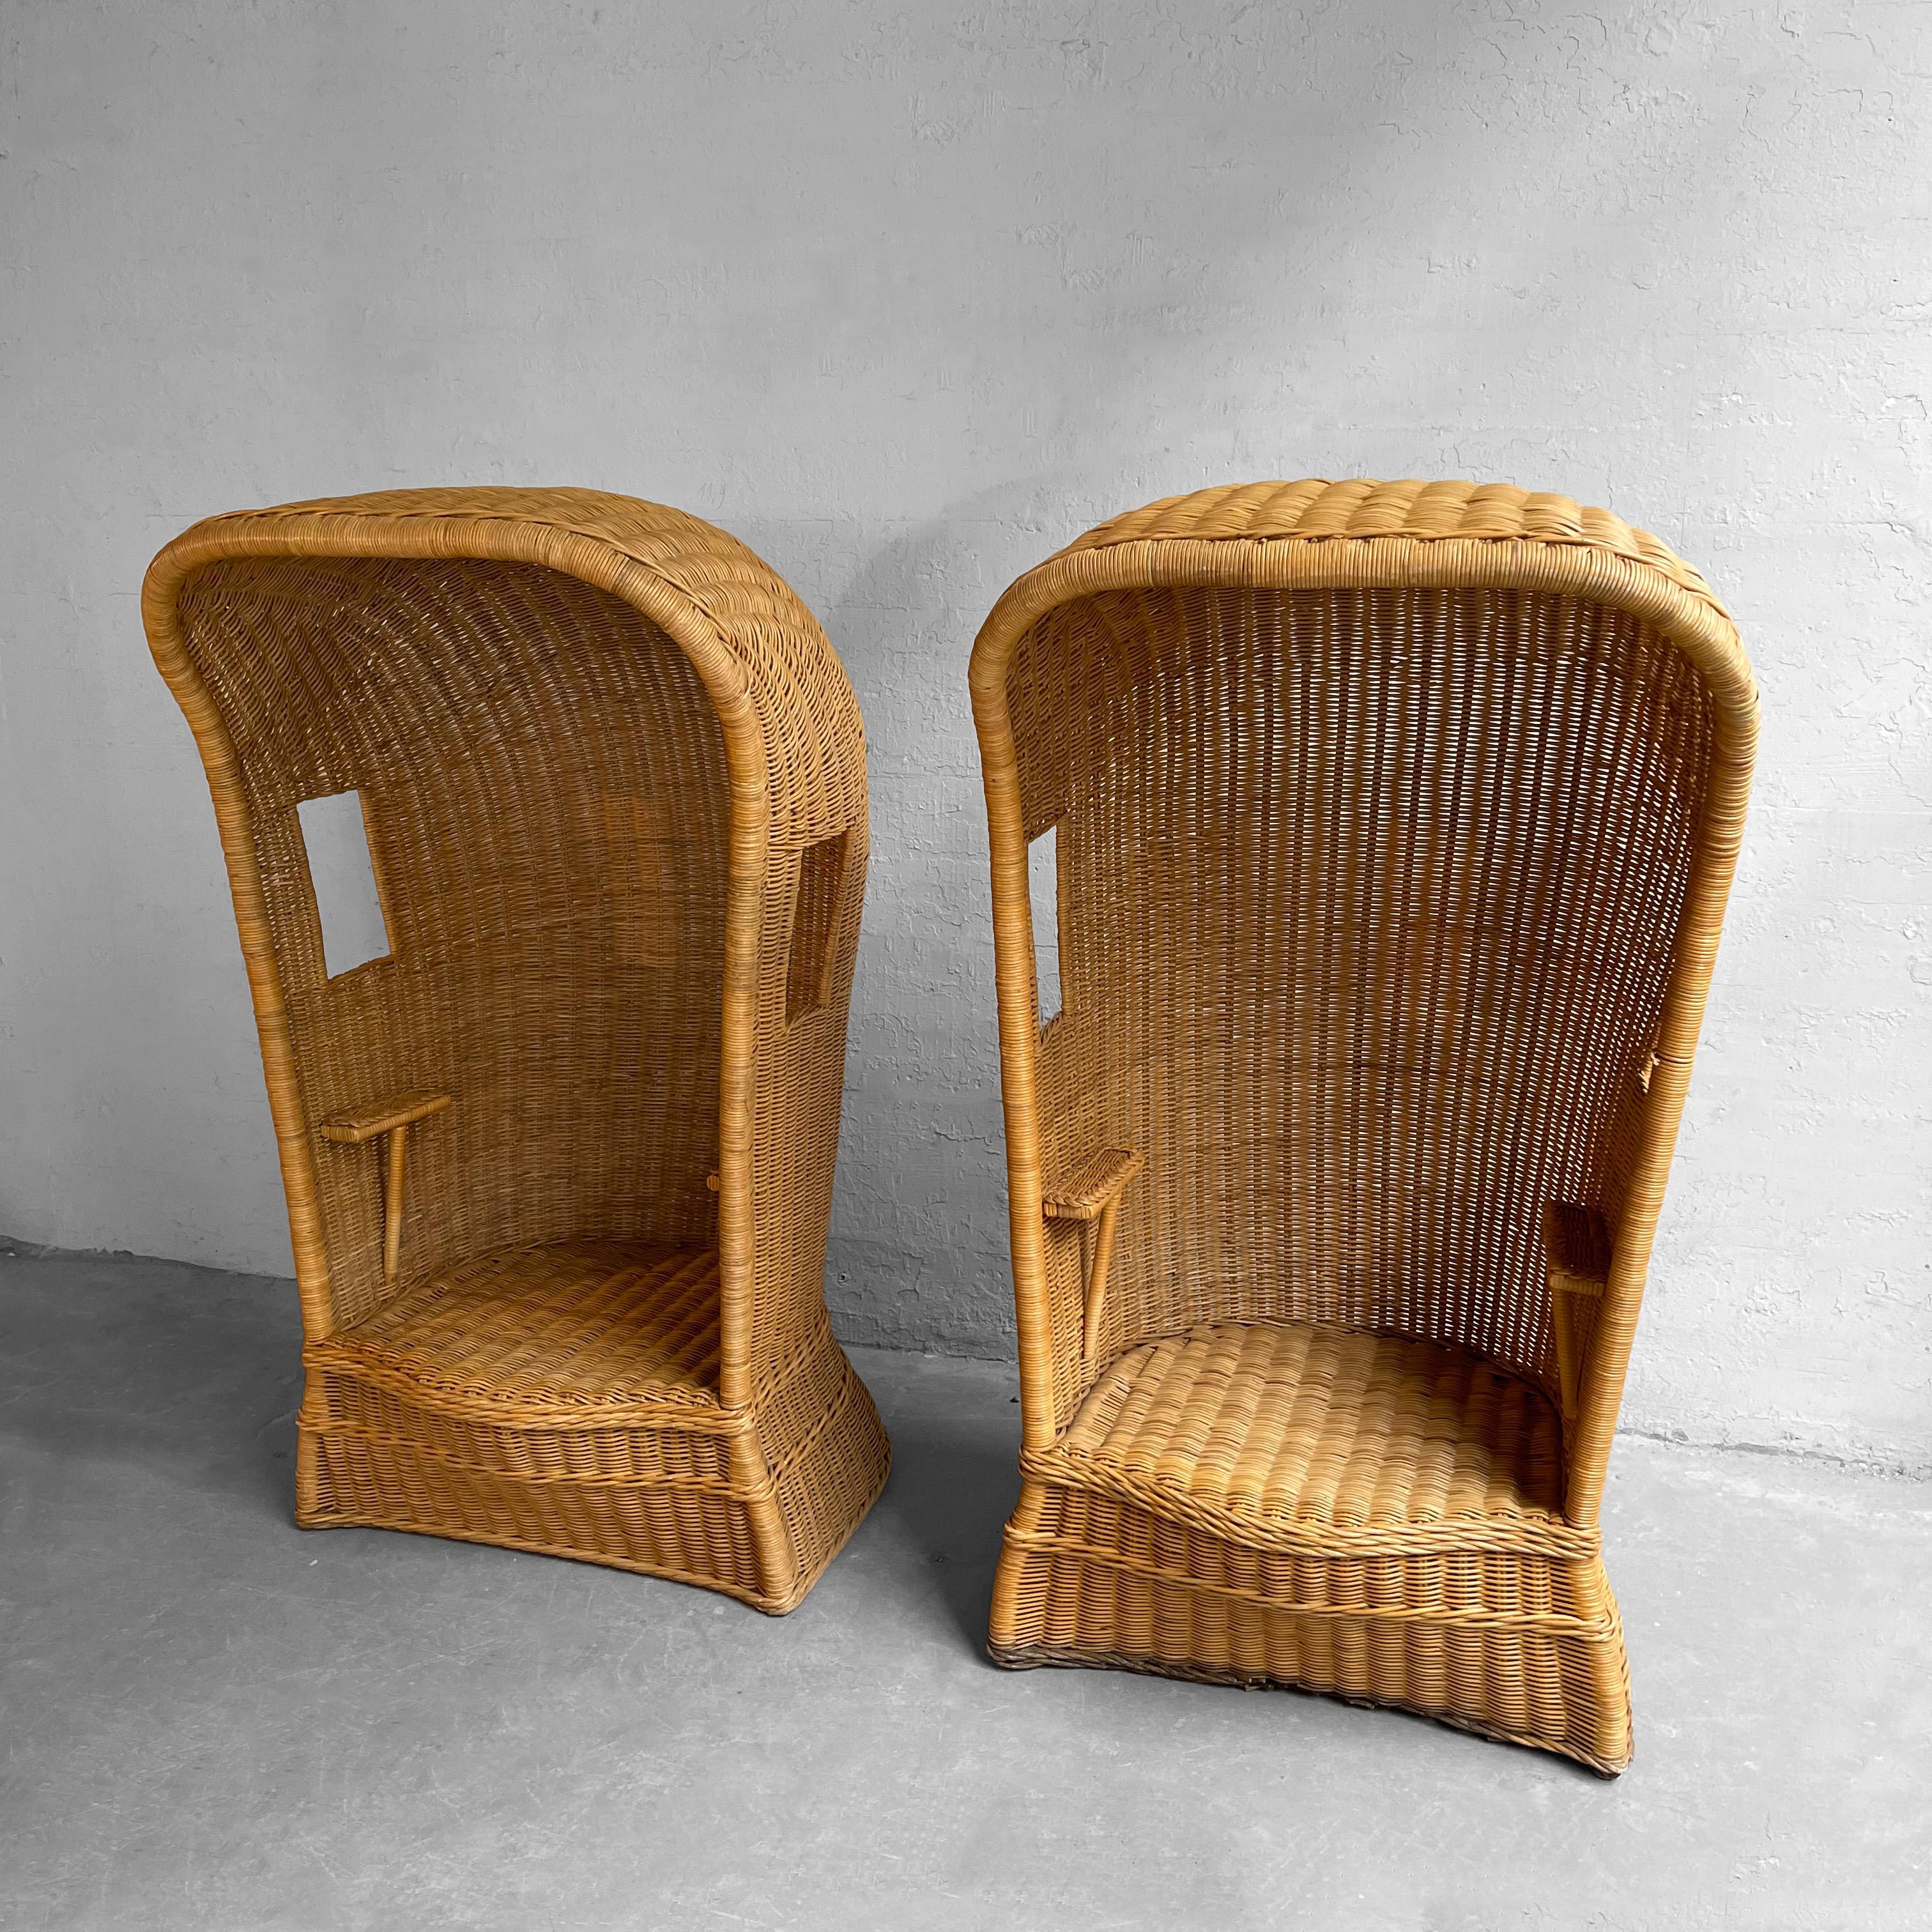 American Pair Of Woven Wicker Porter's Chairs